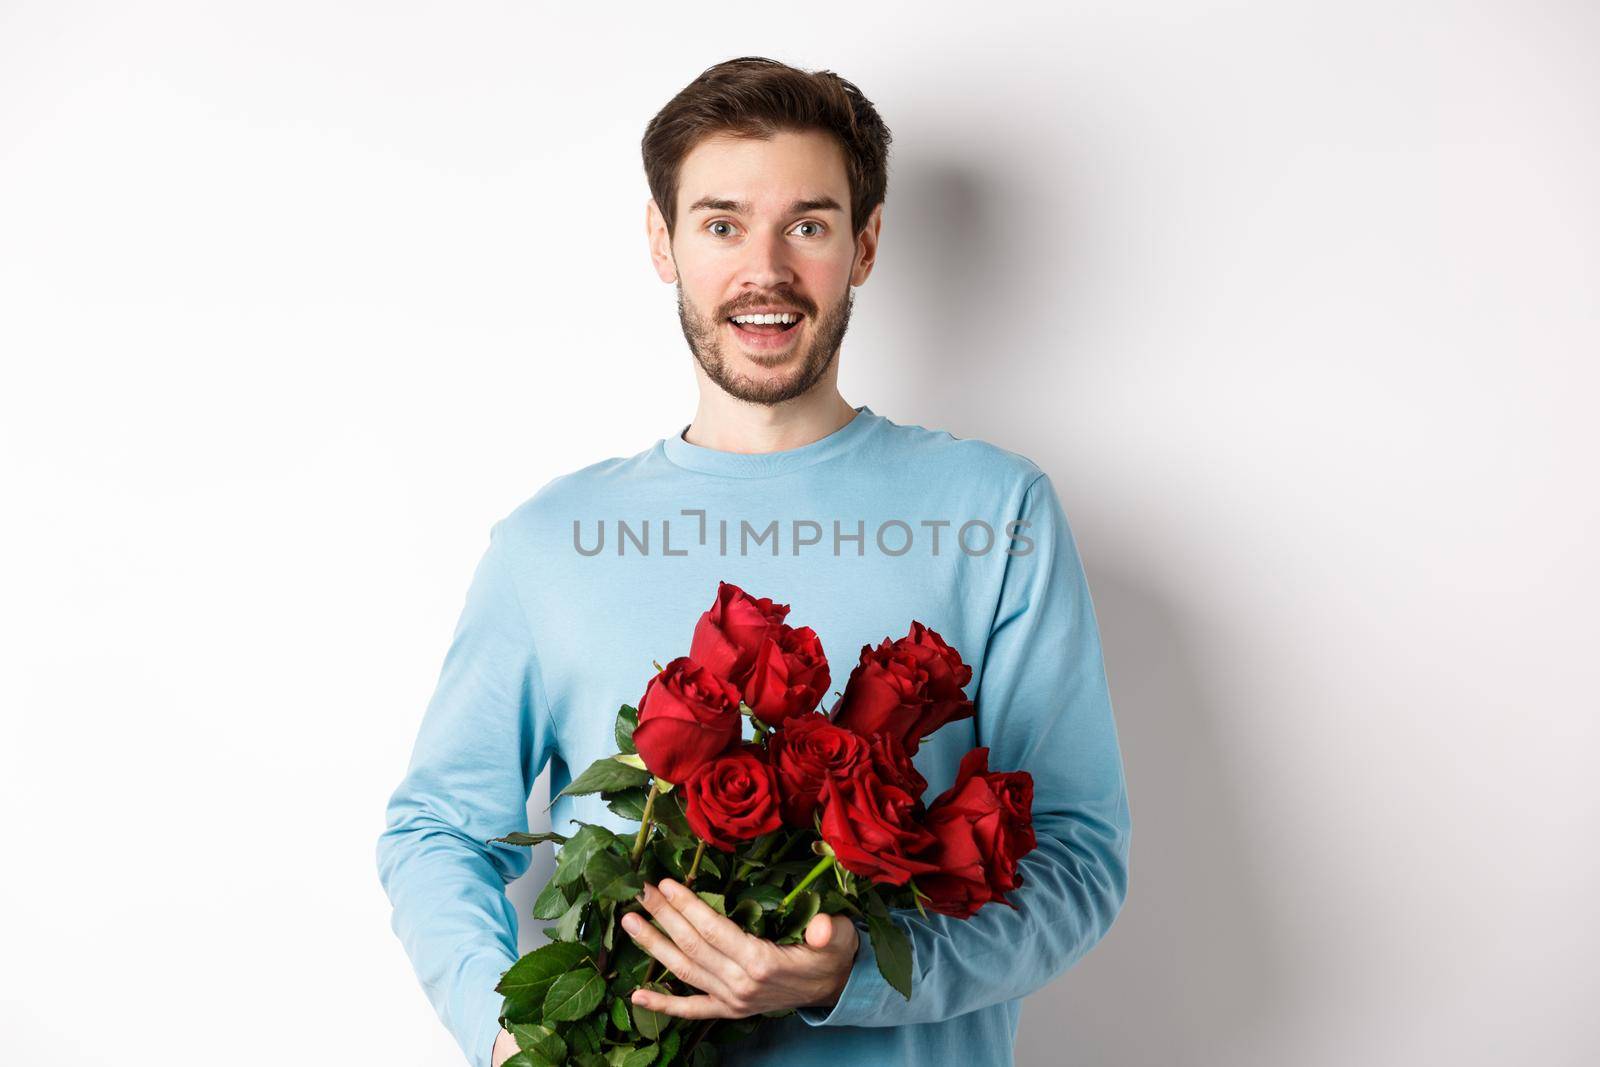 Romantic boyfriend bring beautiful bouquet of red roses on valentines day, having date with girlfriend, saying I love you, standing passionate on white background.